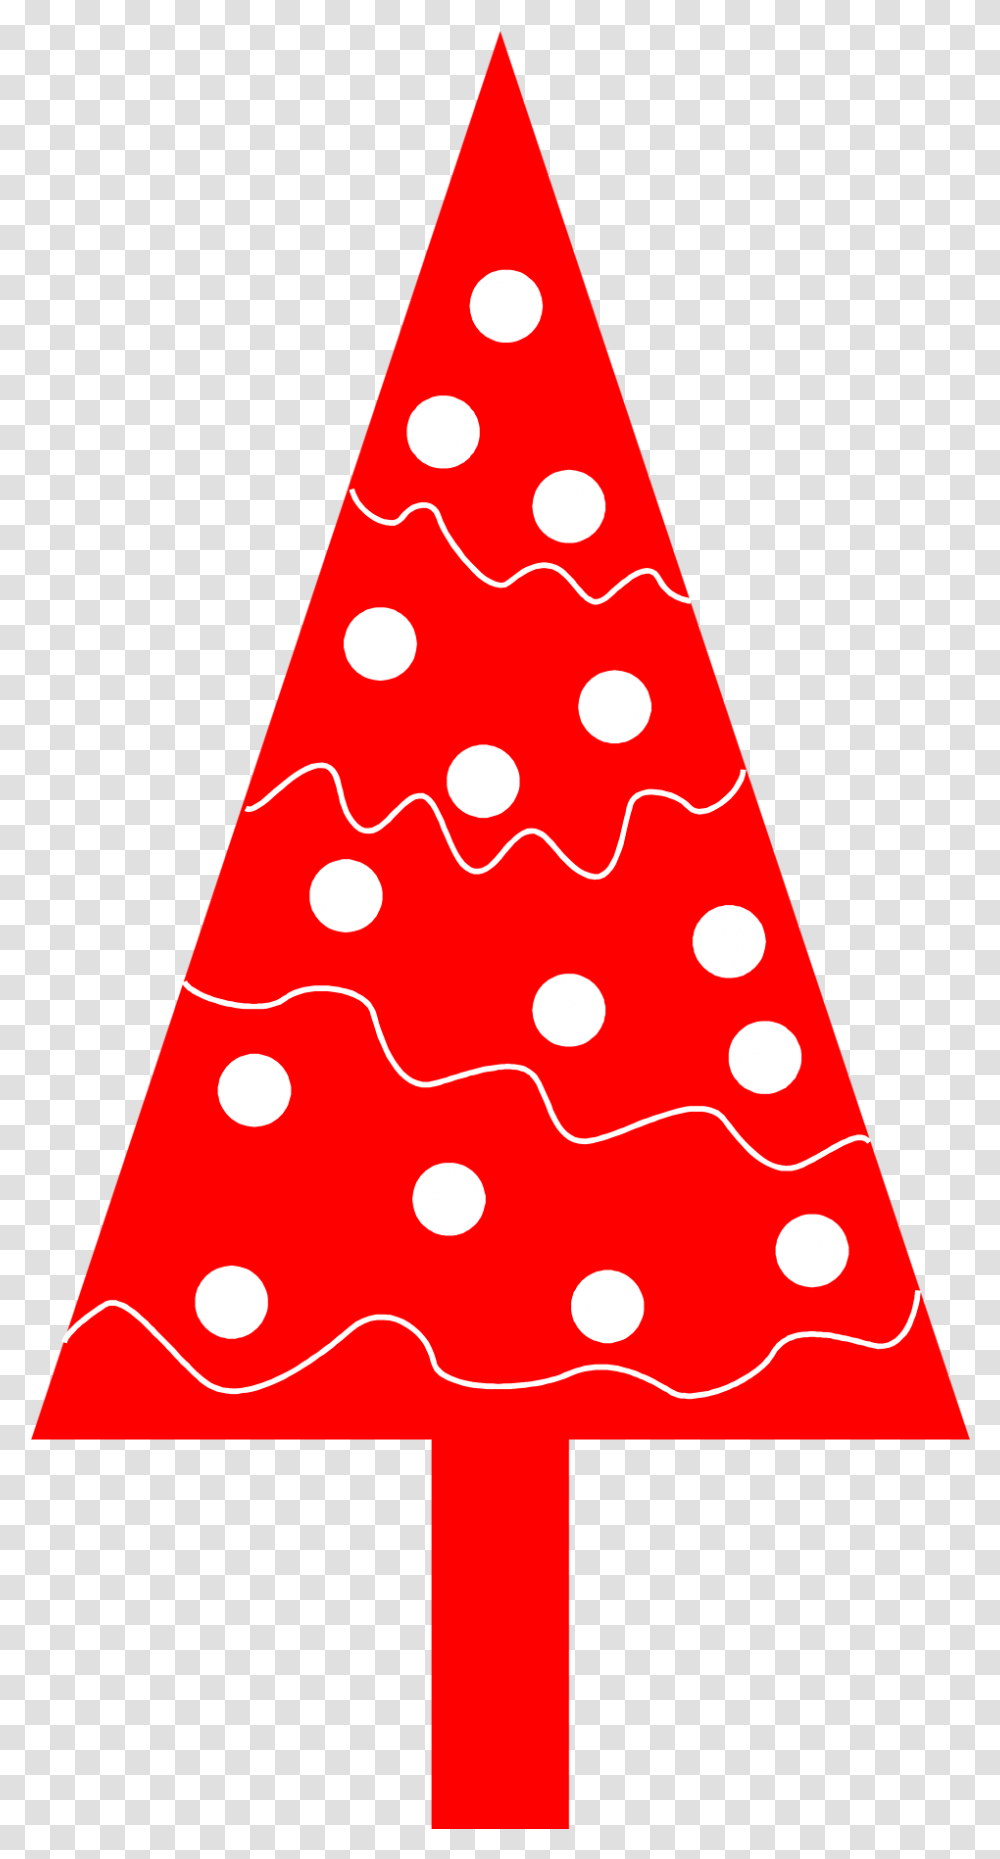 Tree Picture Black And White Files Red, Clothing, Apparel, Party Hat, Christmas Tree Transparent Png